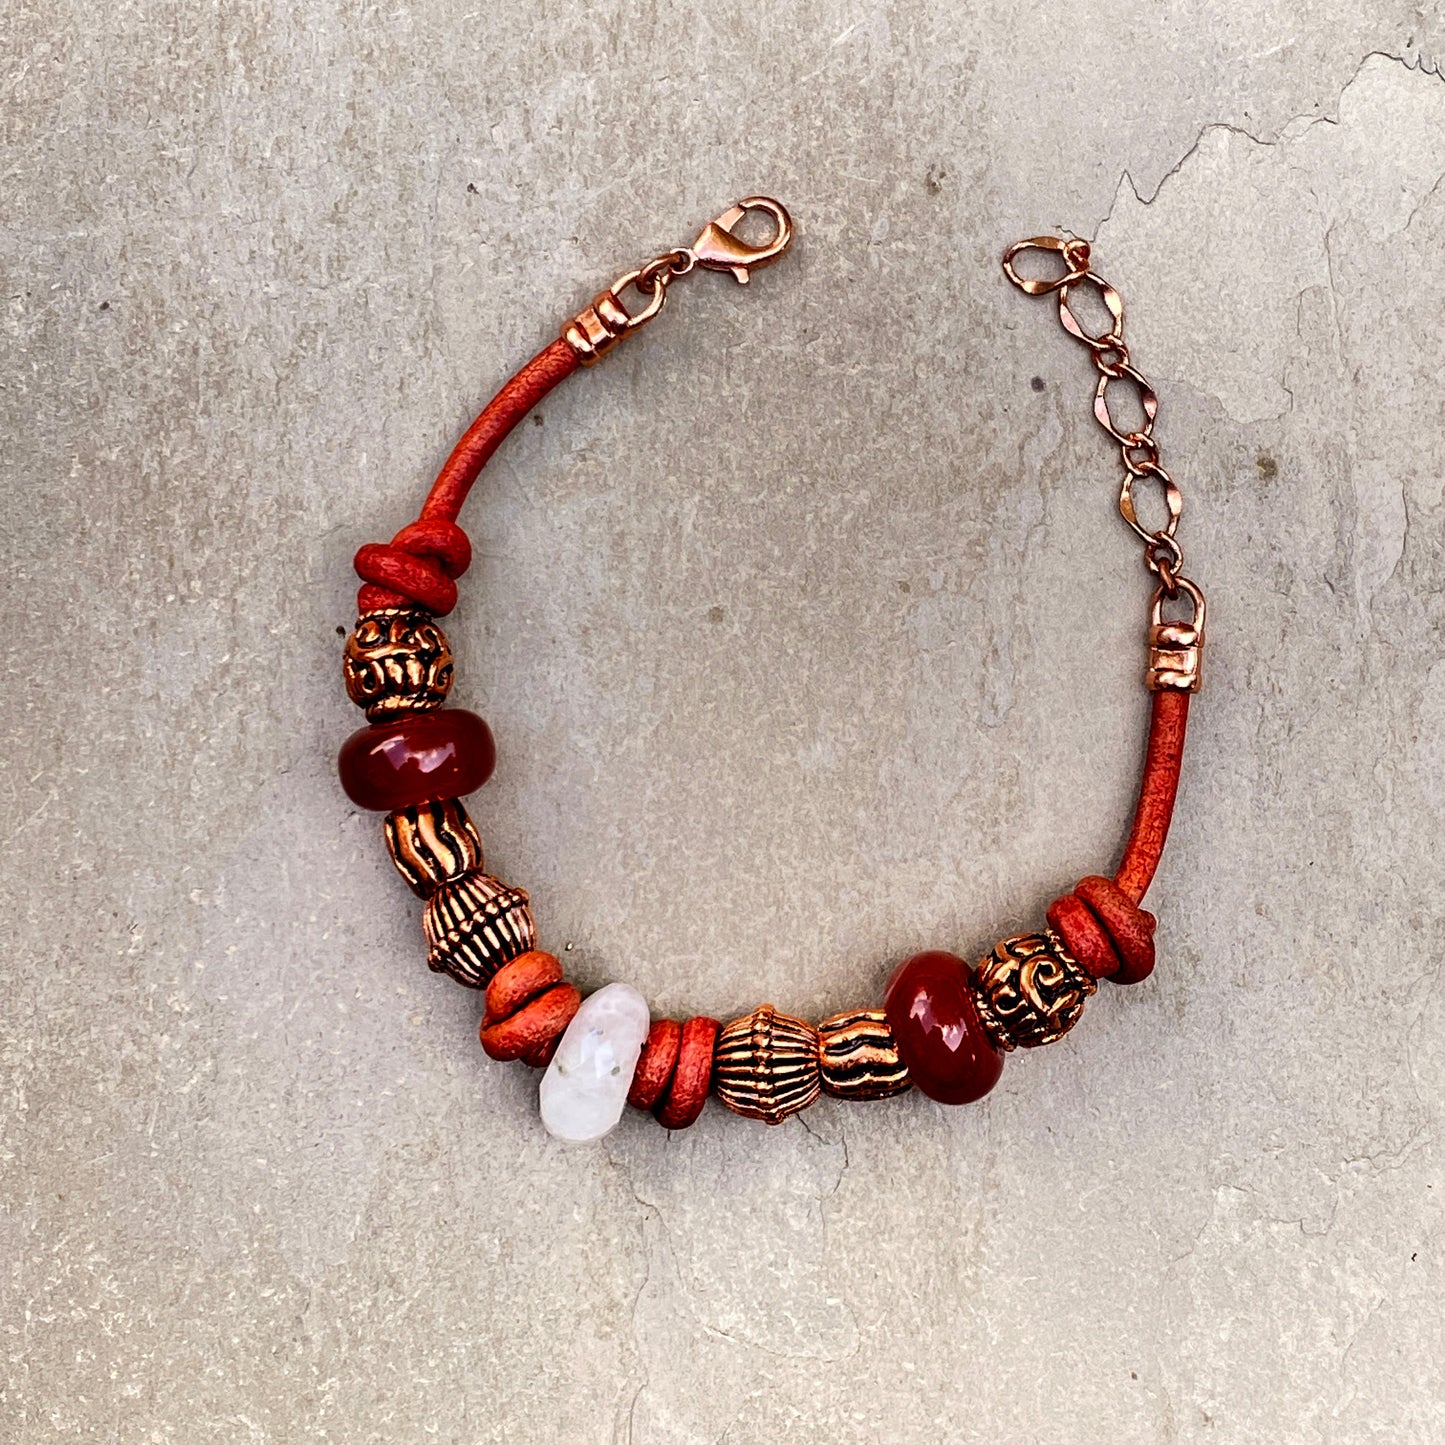 Moonstone gemstone with Red Agate and Copper on Red Leather clasp Bracelet